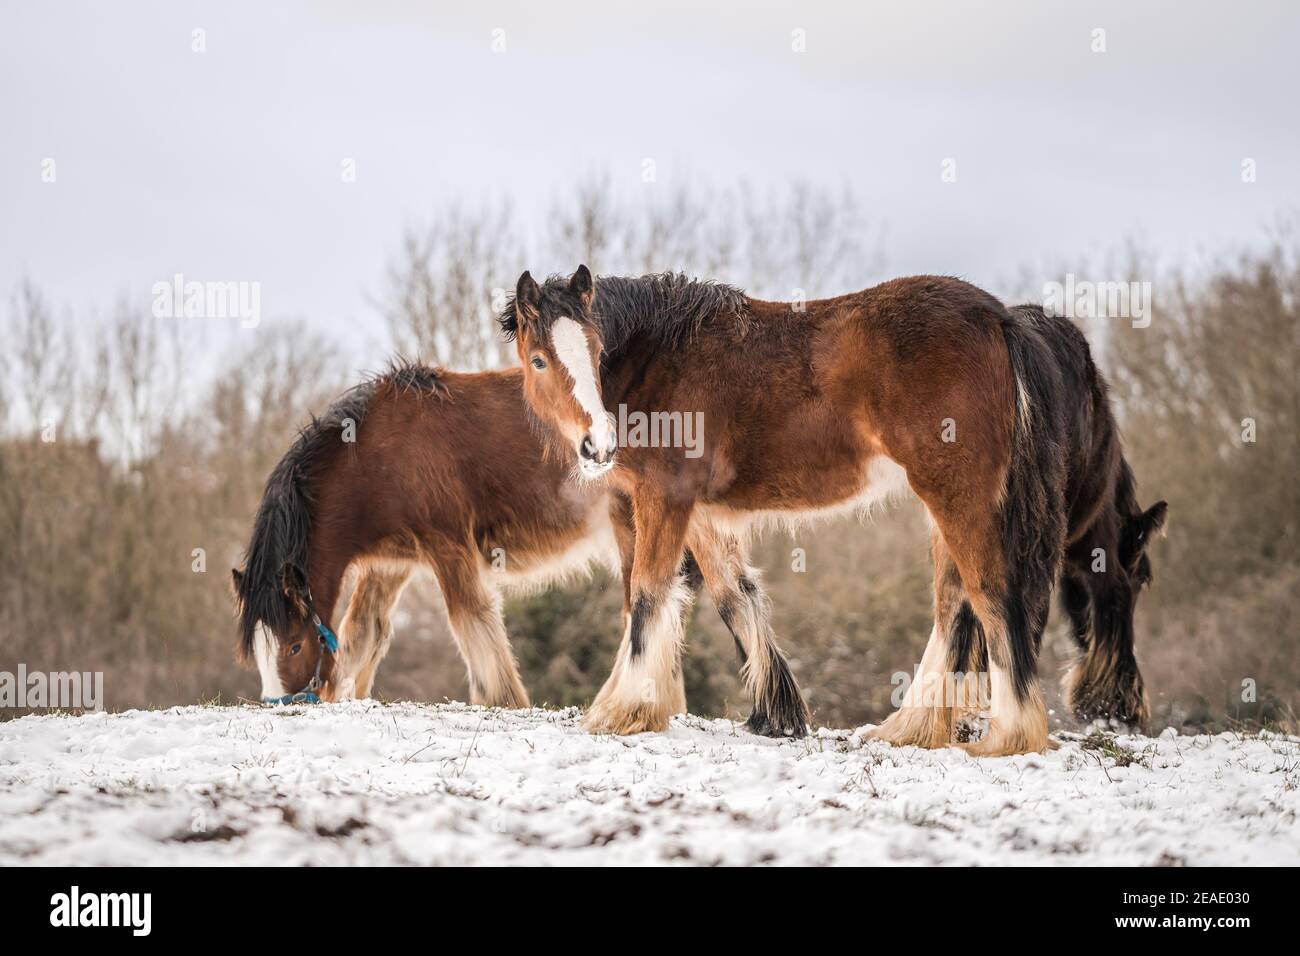 Beautiful big Irish Gypsy Cob horse foal standing wild in snow field on ground looking towards camera through cold deep snowy winter landscape shire Stock Photo